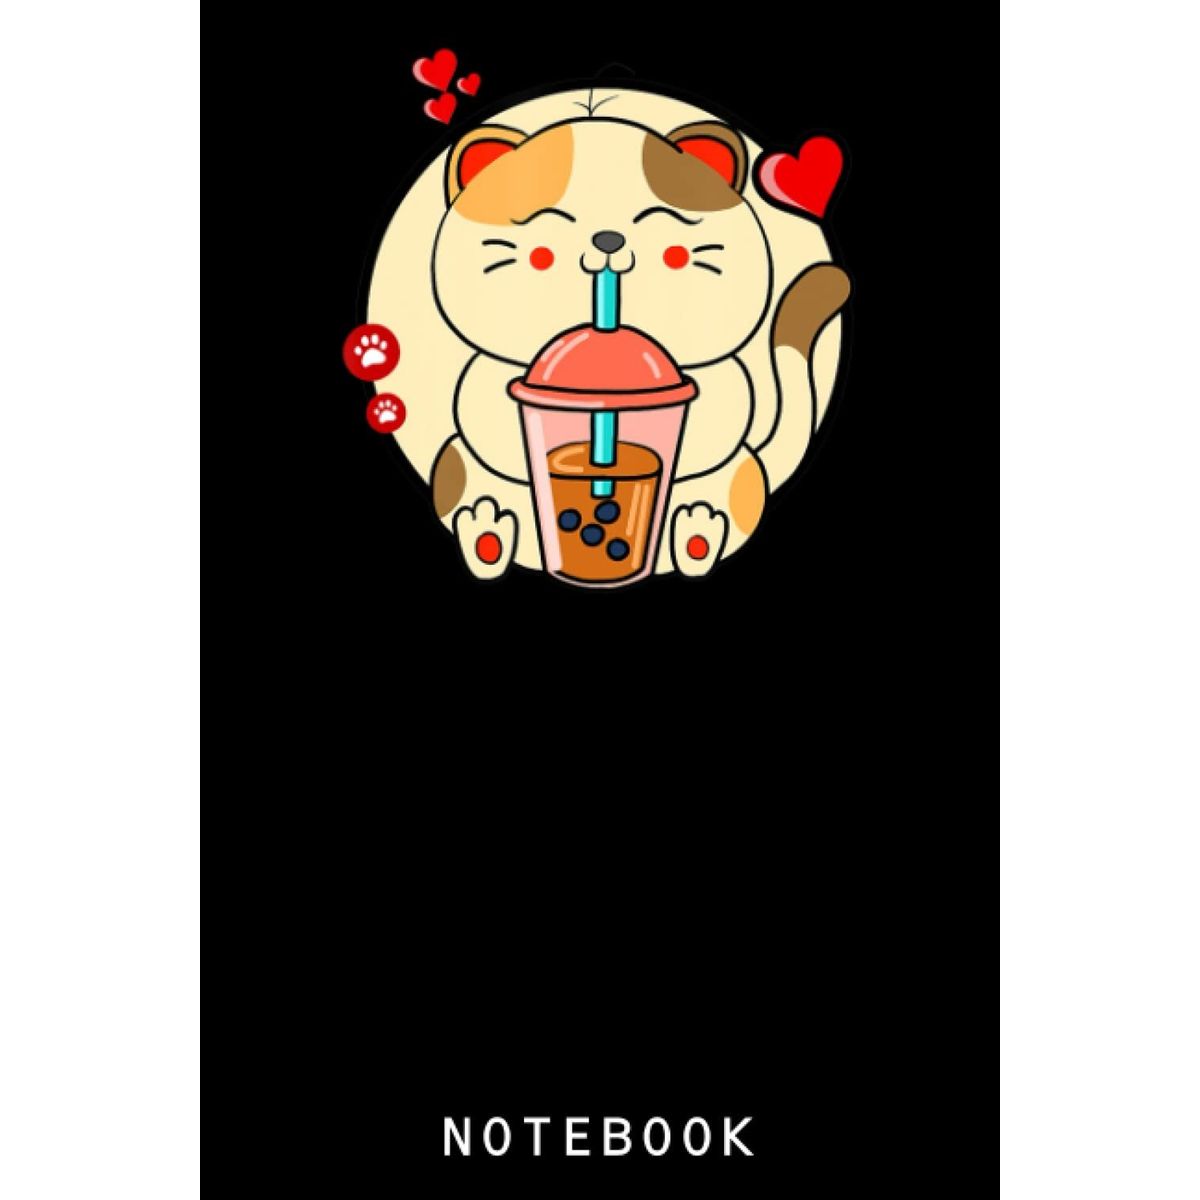 Cat Boba Tea Bubble Tea Anime Kawaii Neko Notebook: Cute wide ruled  composition notebook for kittens and cats lover | kawaii kitty college wide  ruled